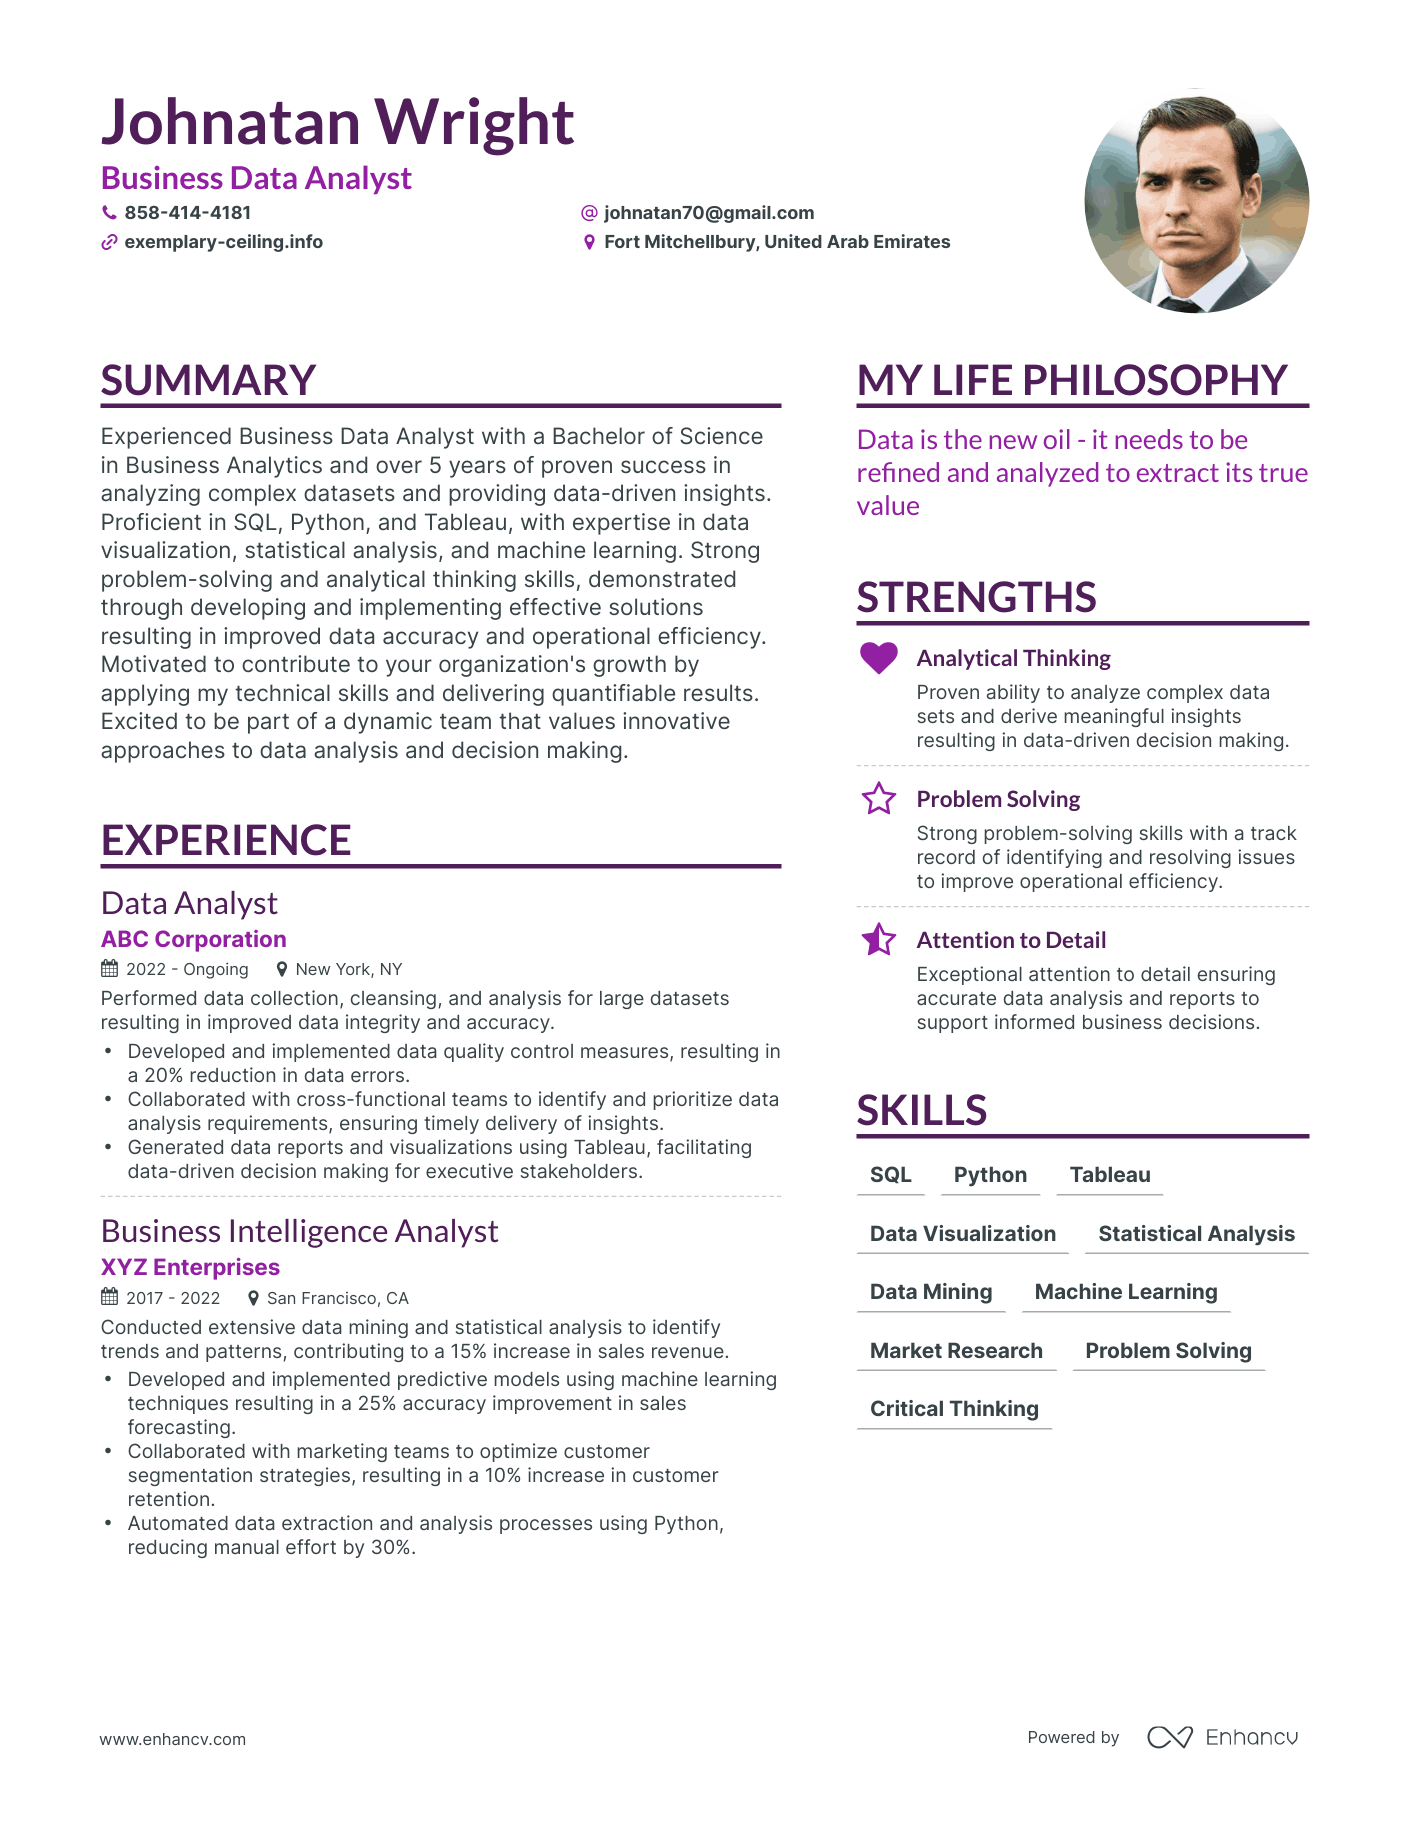 Business Data Analyst resume example